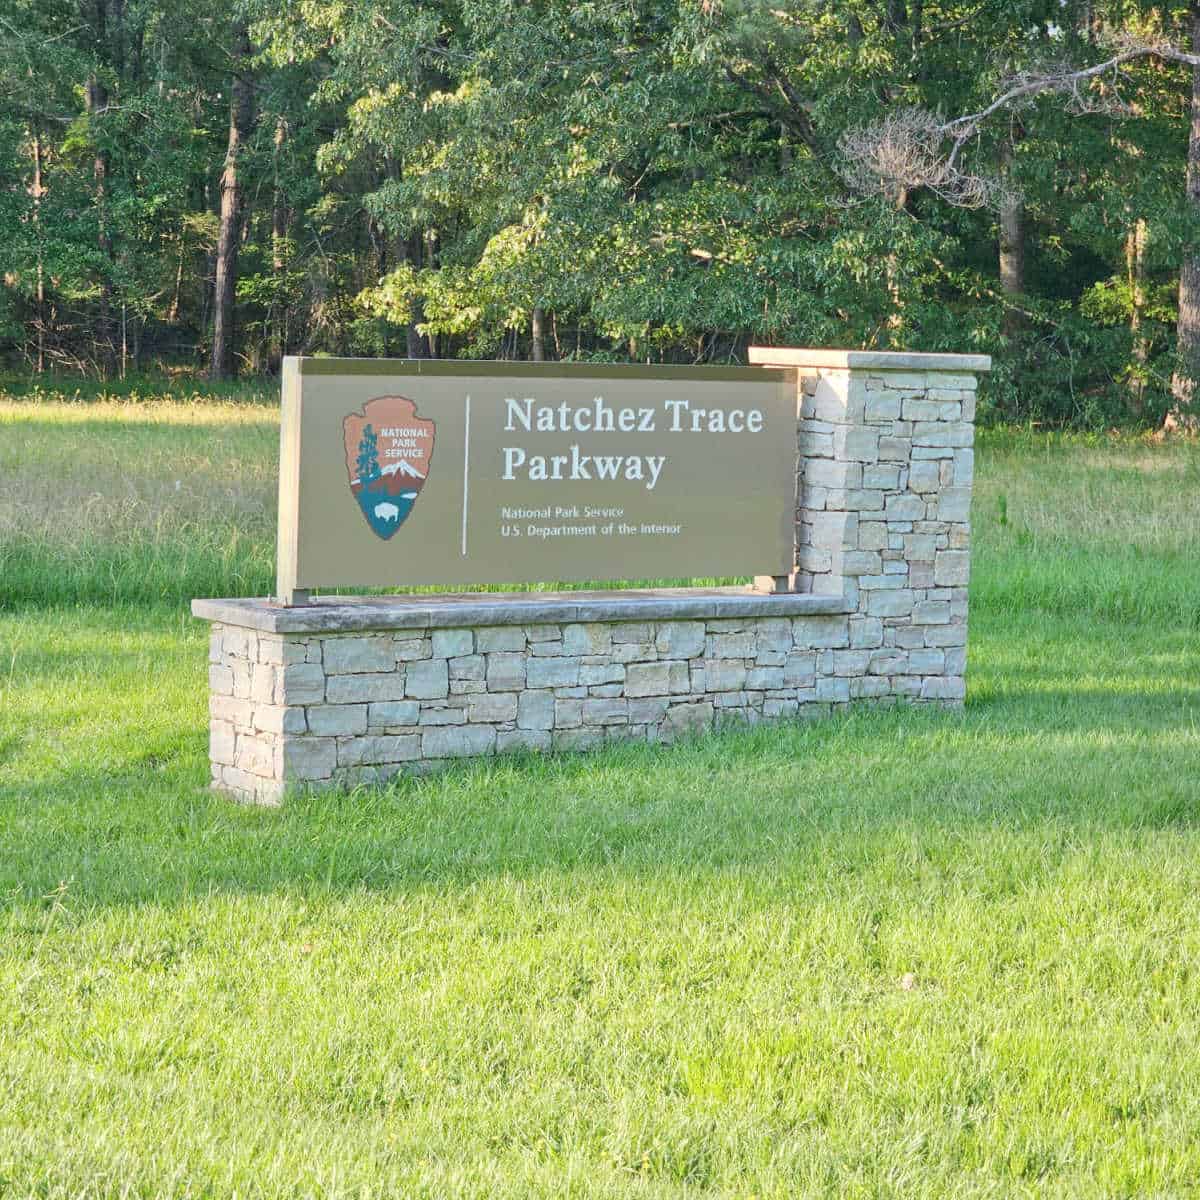 Natchez Trace Parkway Sign in a grassy field